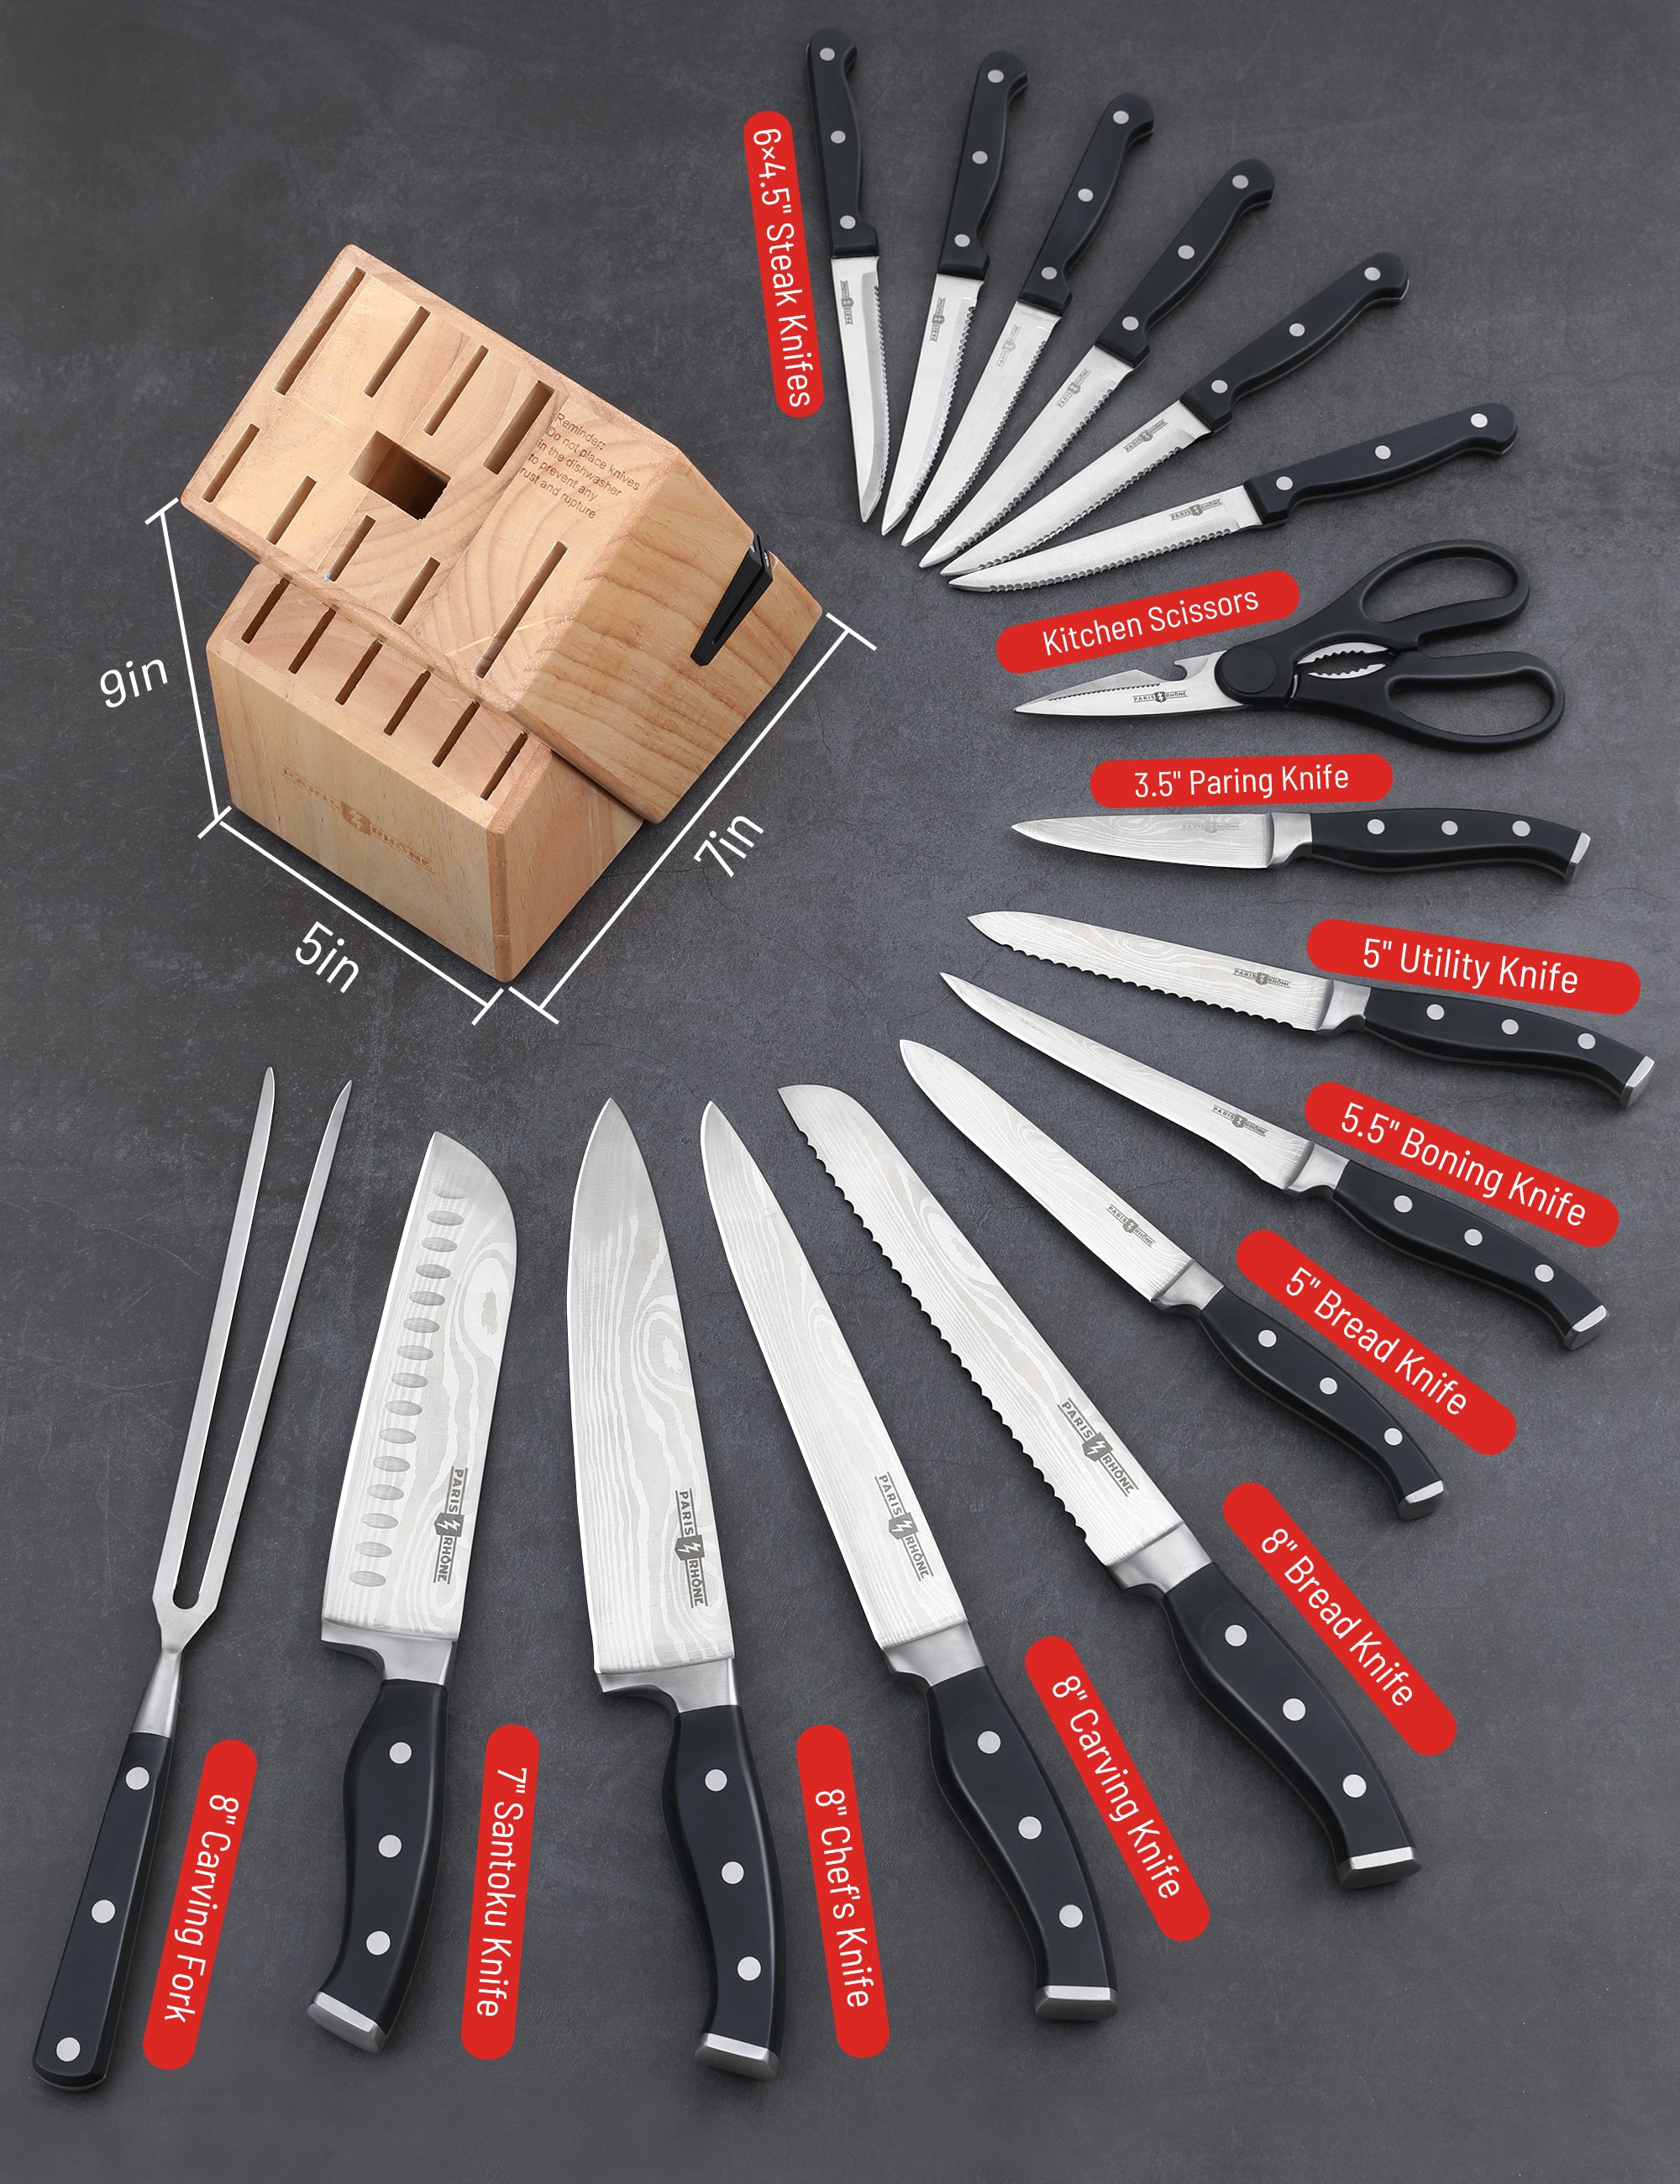 16-Piece Japanese Knife Set with Removable Block, CornflowerBlue